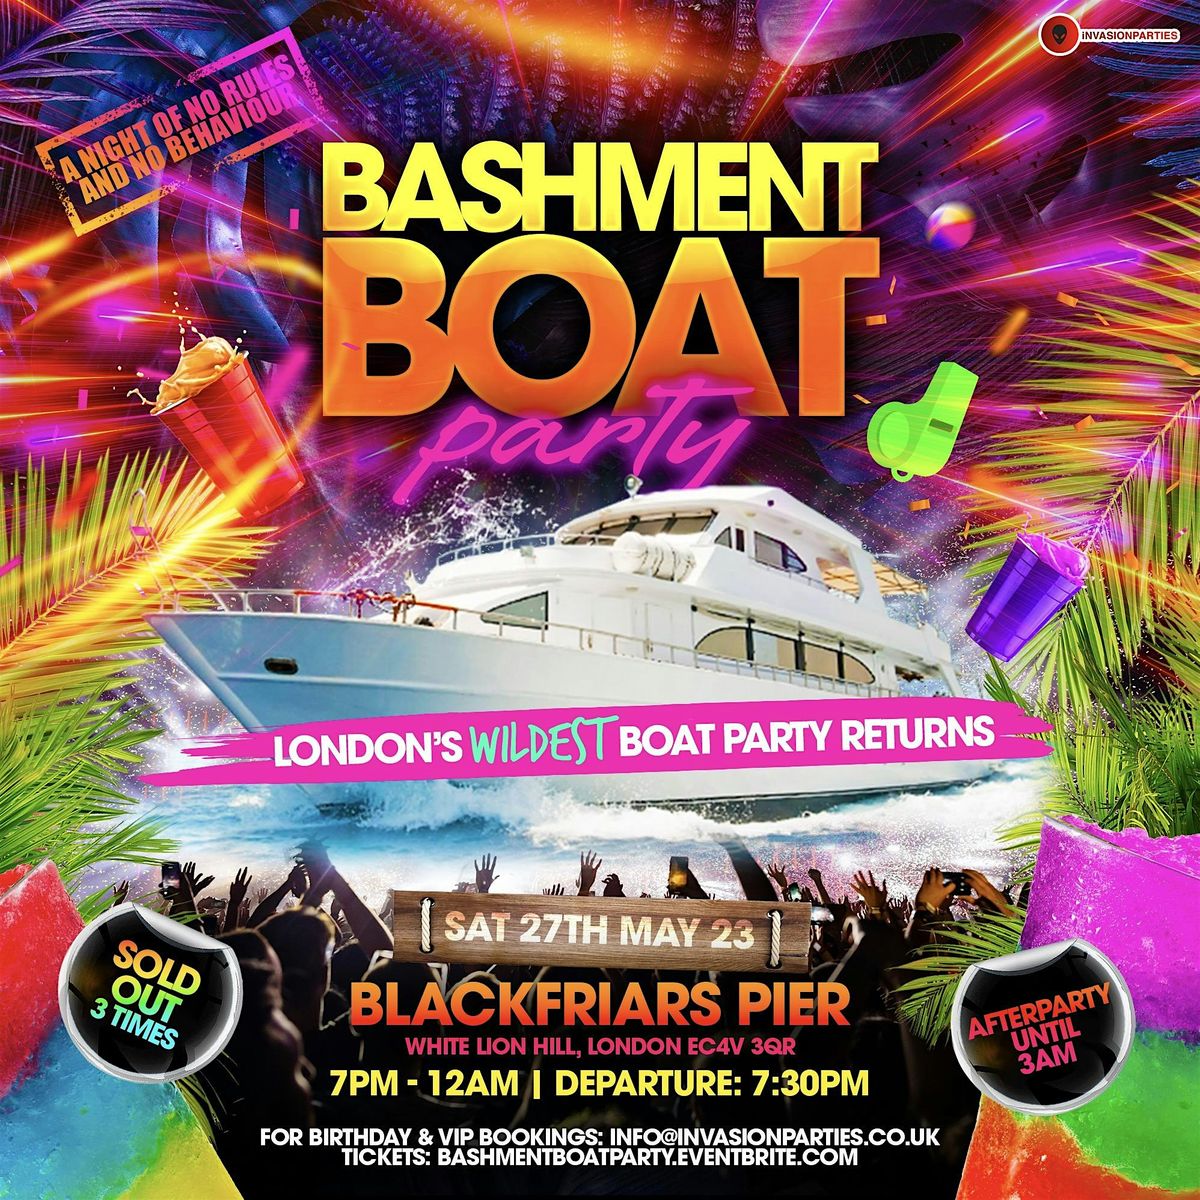 Bashment Boat Party - Bank Holiday Weekend